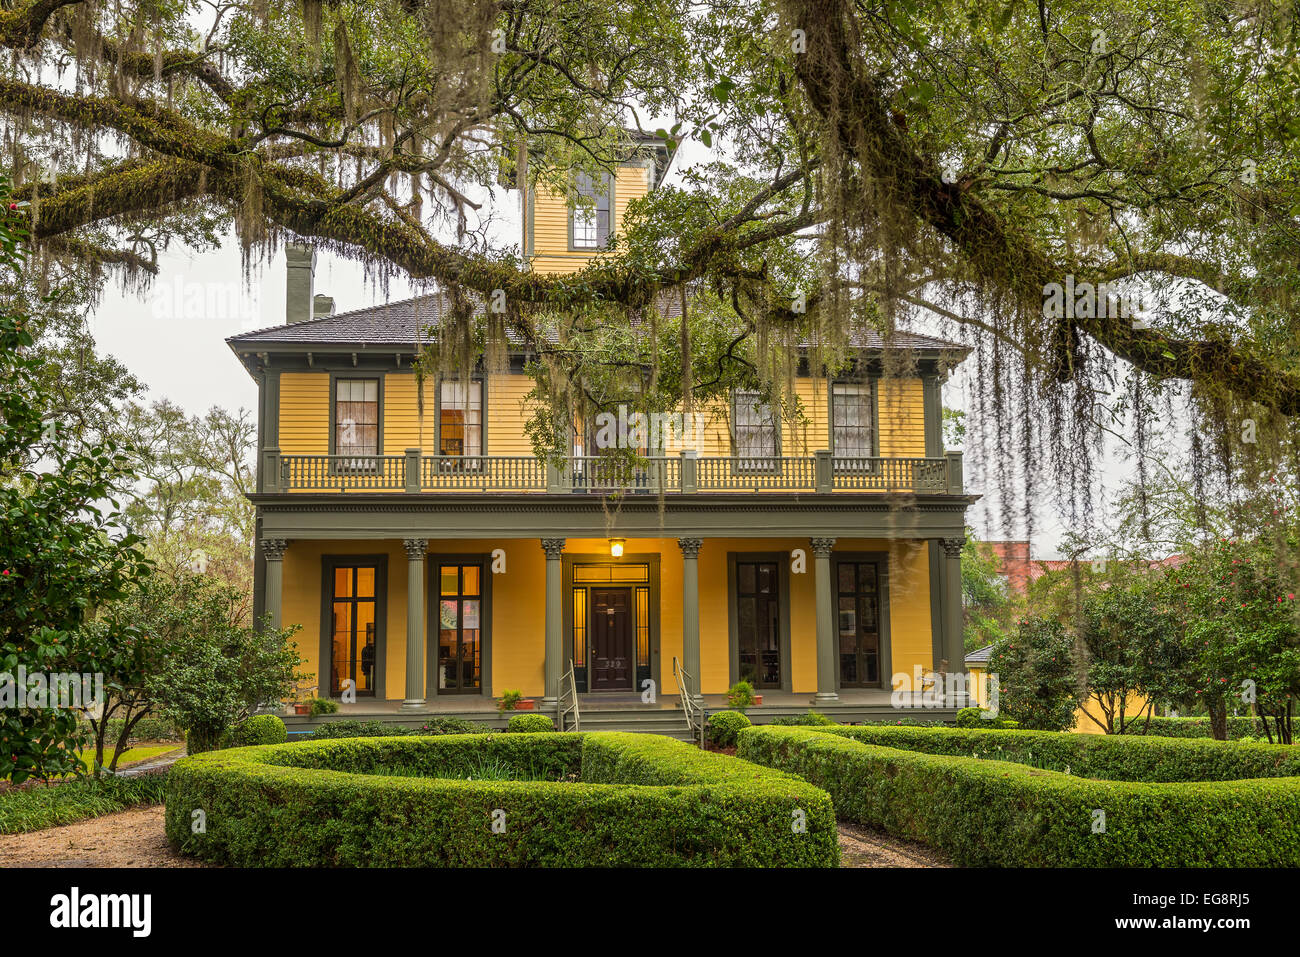 The Brokaw-McDougall House located in the National Register Historic District Stock Photo